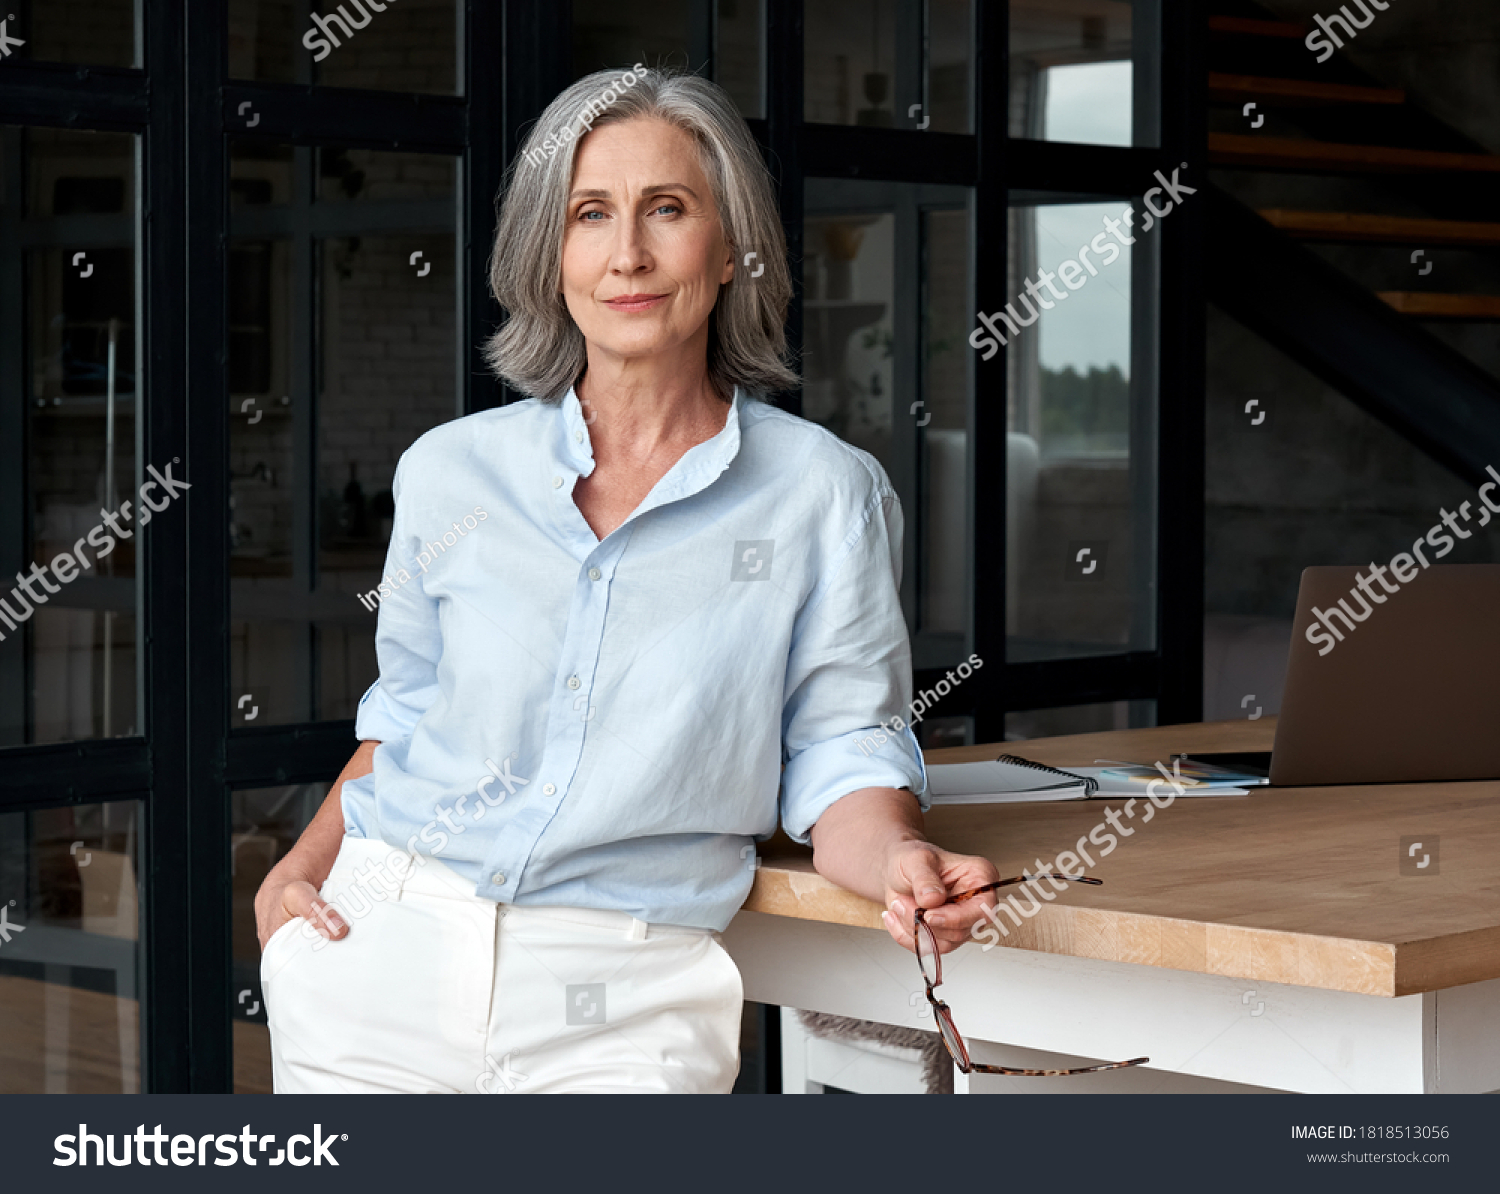 Confident stylish european mature middle aged woman standing at workplace. Stylish older senior businesswoman, 60s gray-haired lady executive leader manager looking at camera in office, portrait. #1818513056